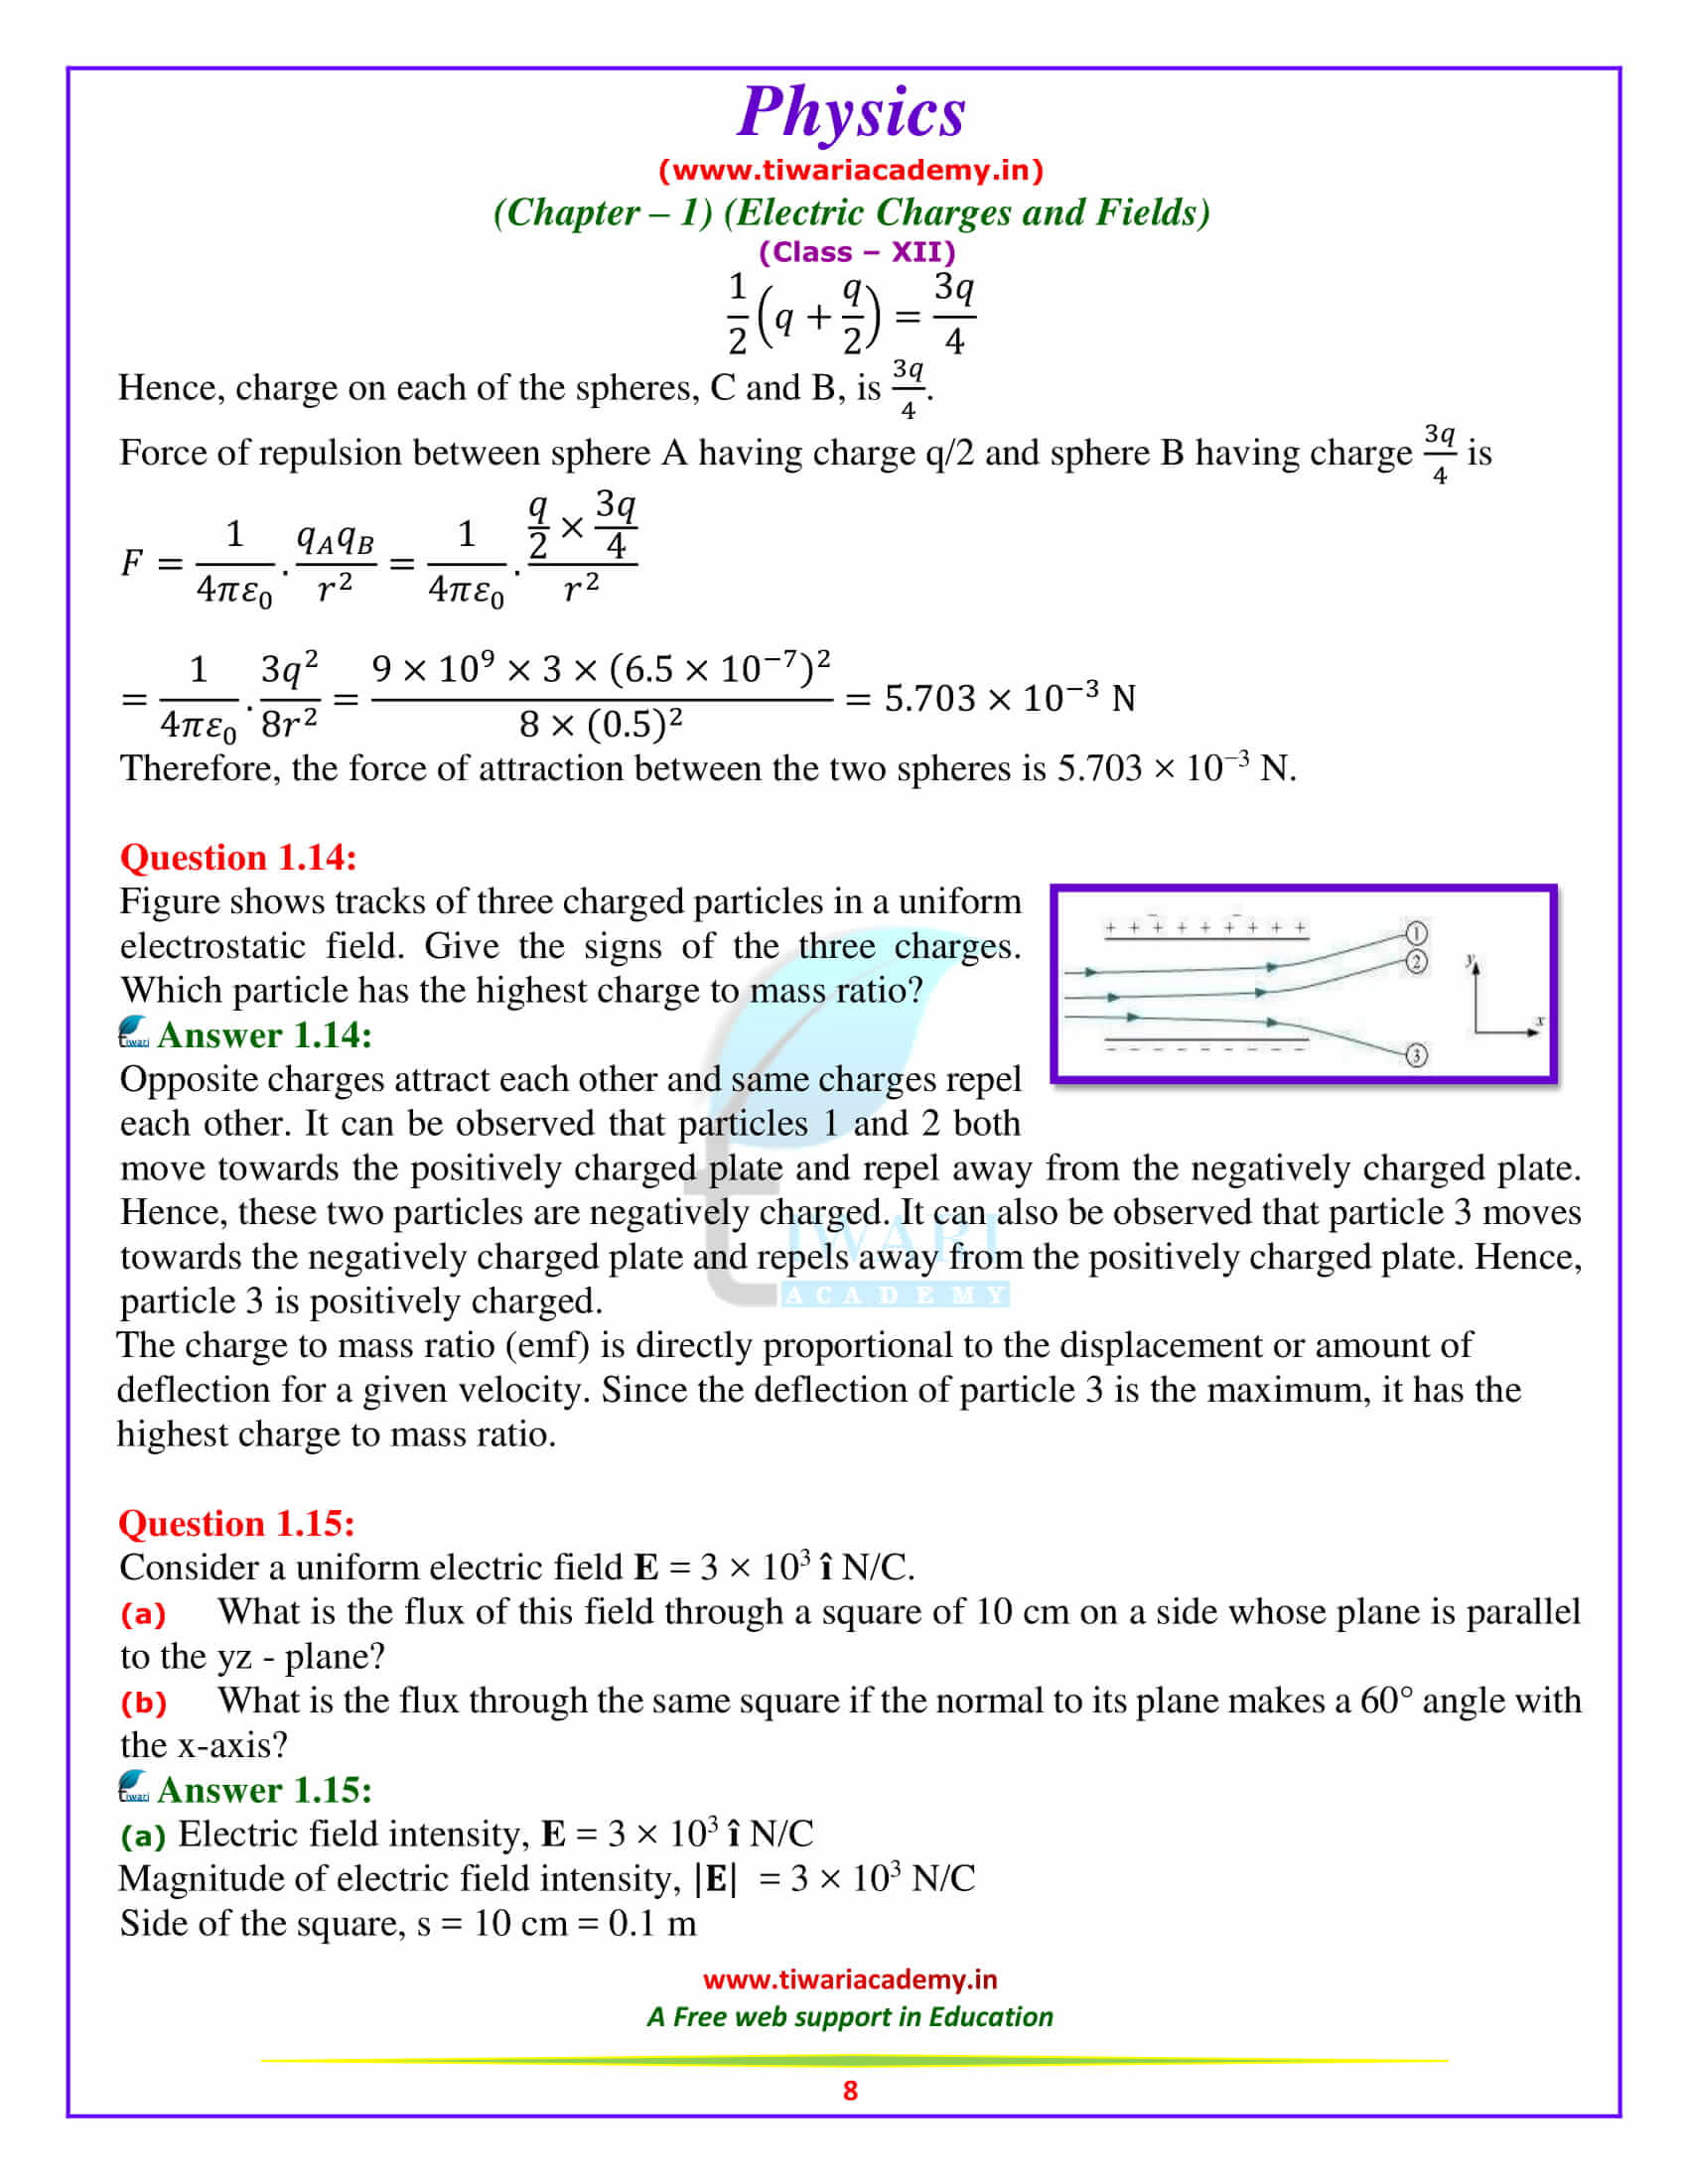 NCERT Solutions for Class 12 Physics Chapter 1 free to download in english